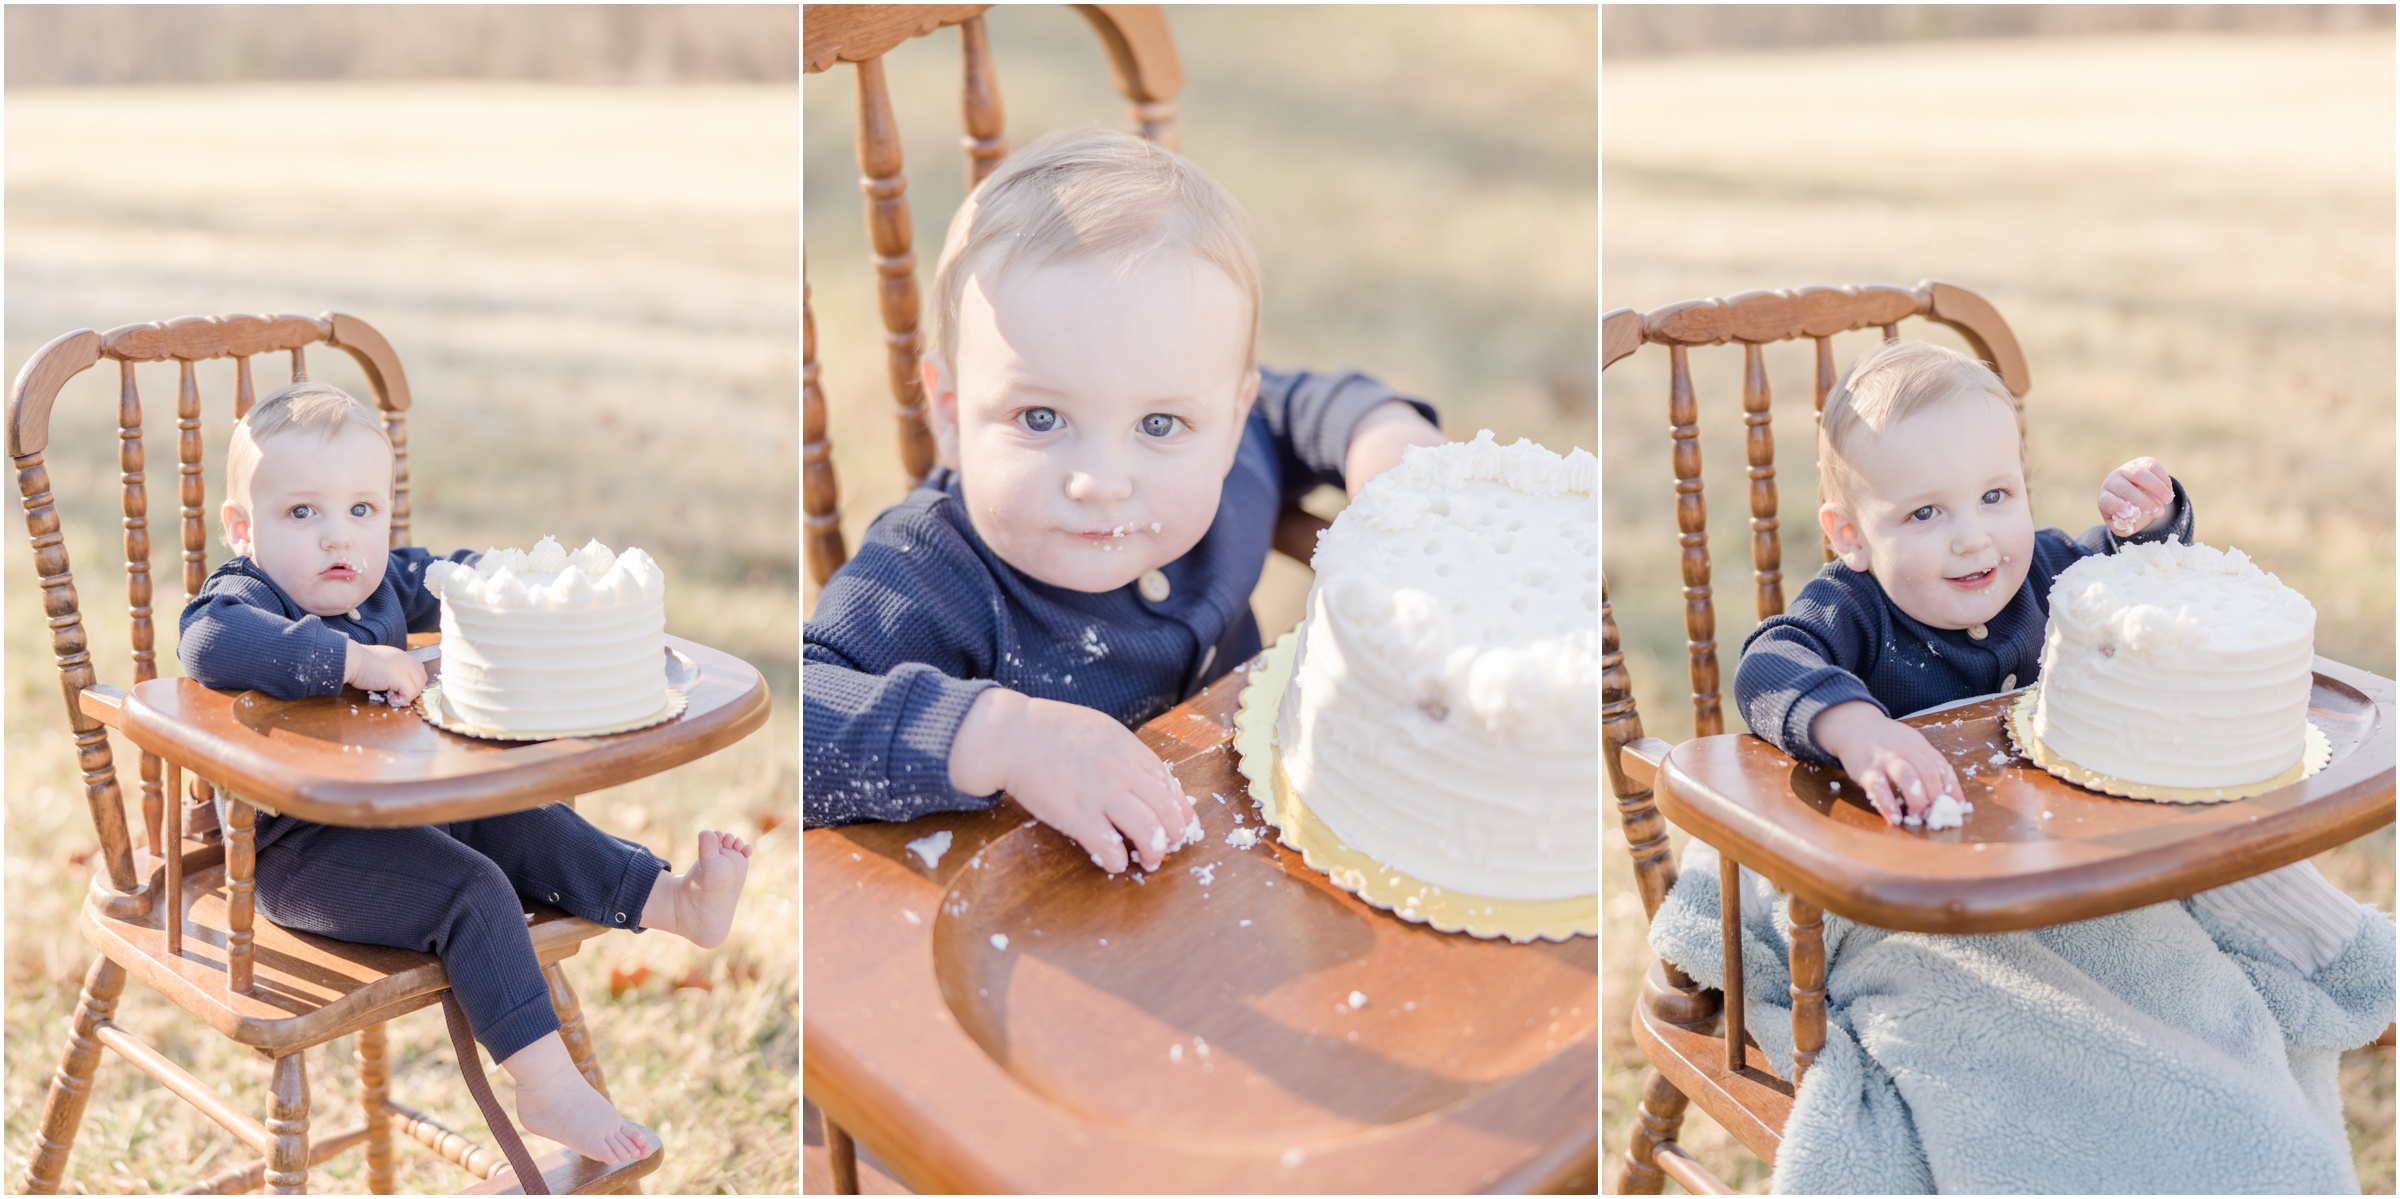 Portraits of a one year old in a high chair for cake smash photos in Greenville.